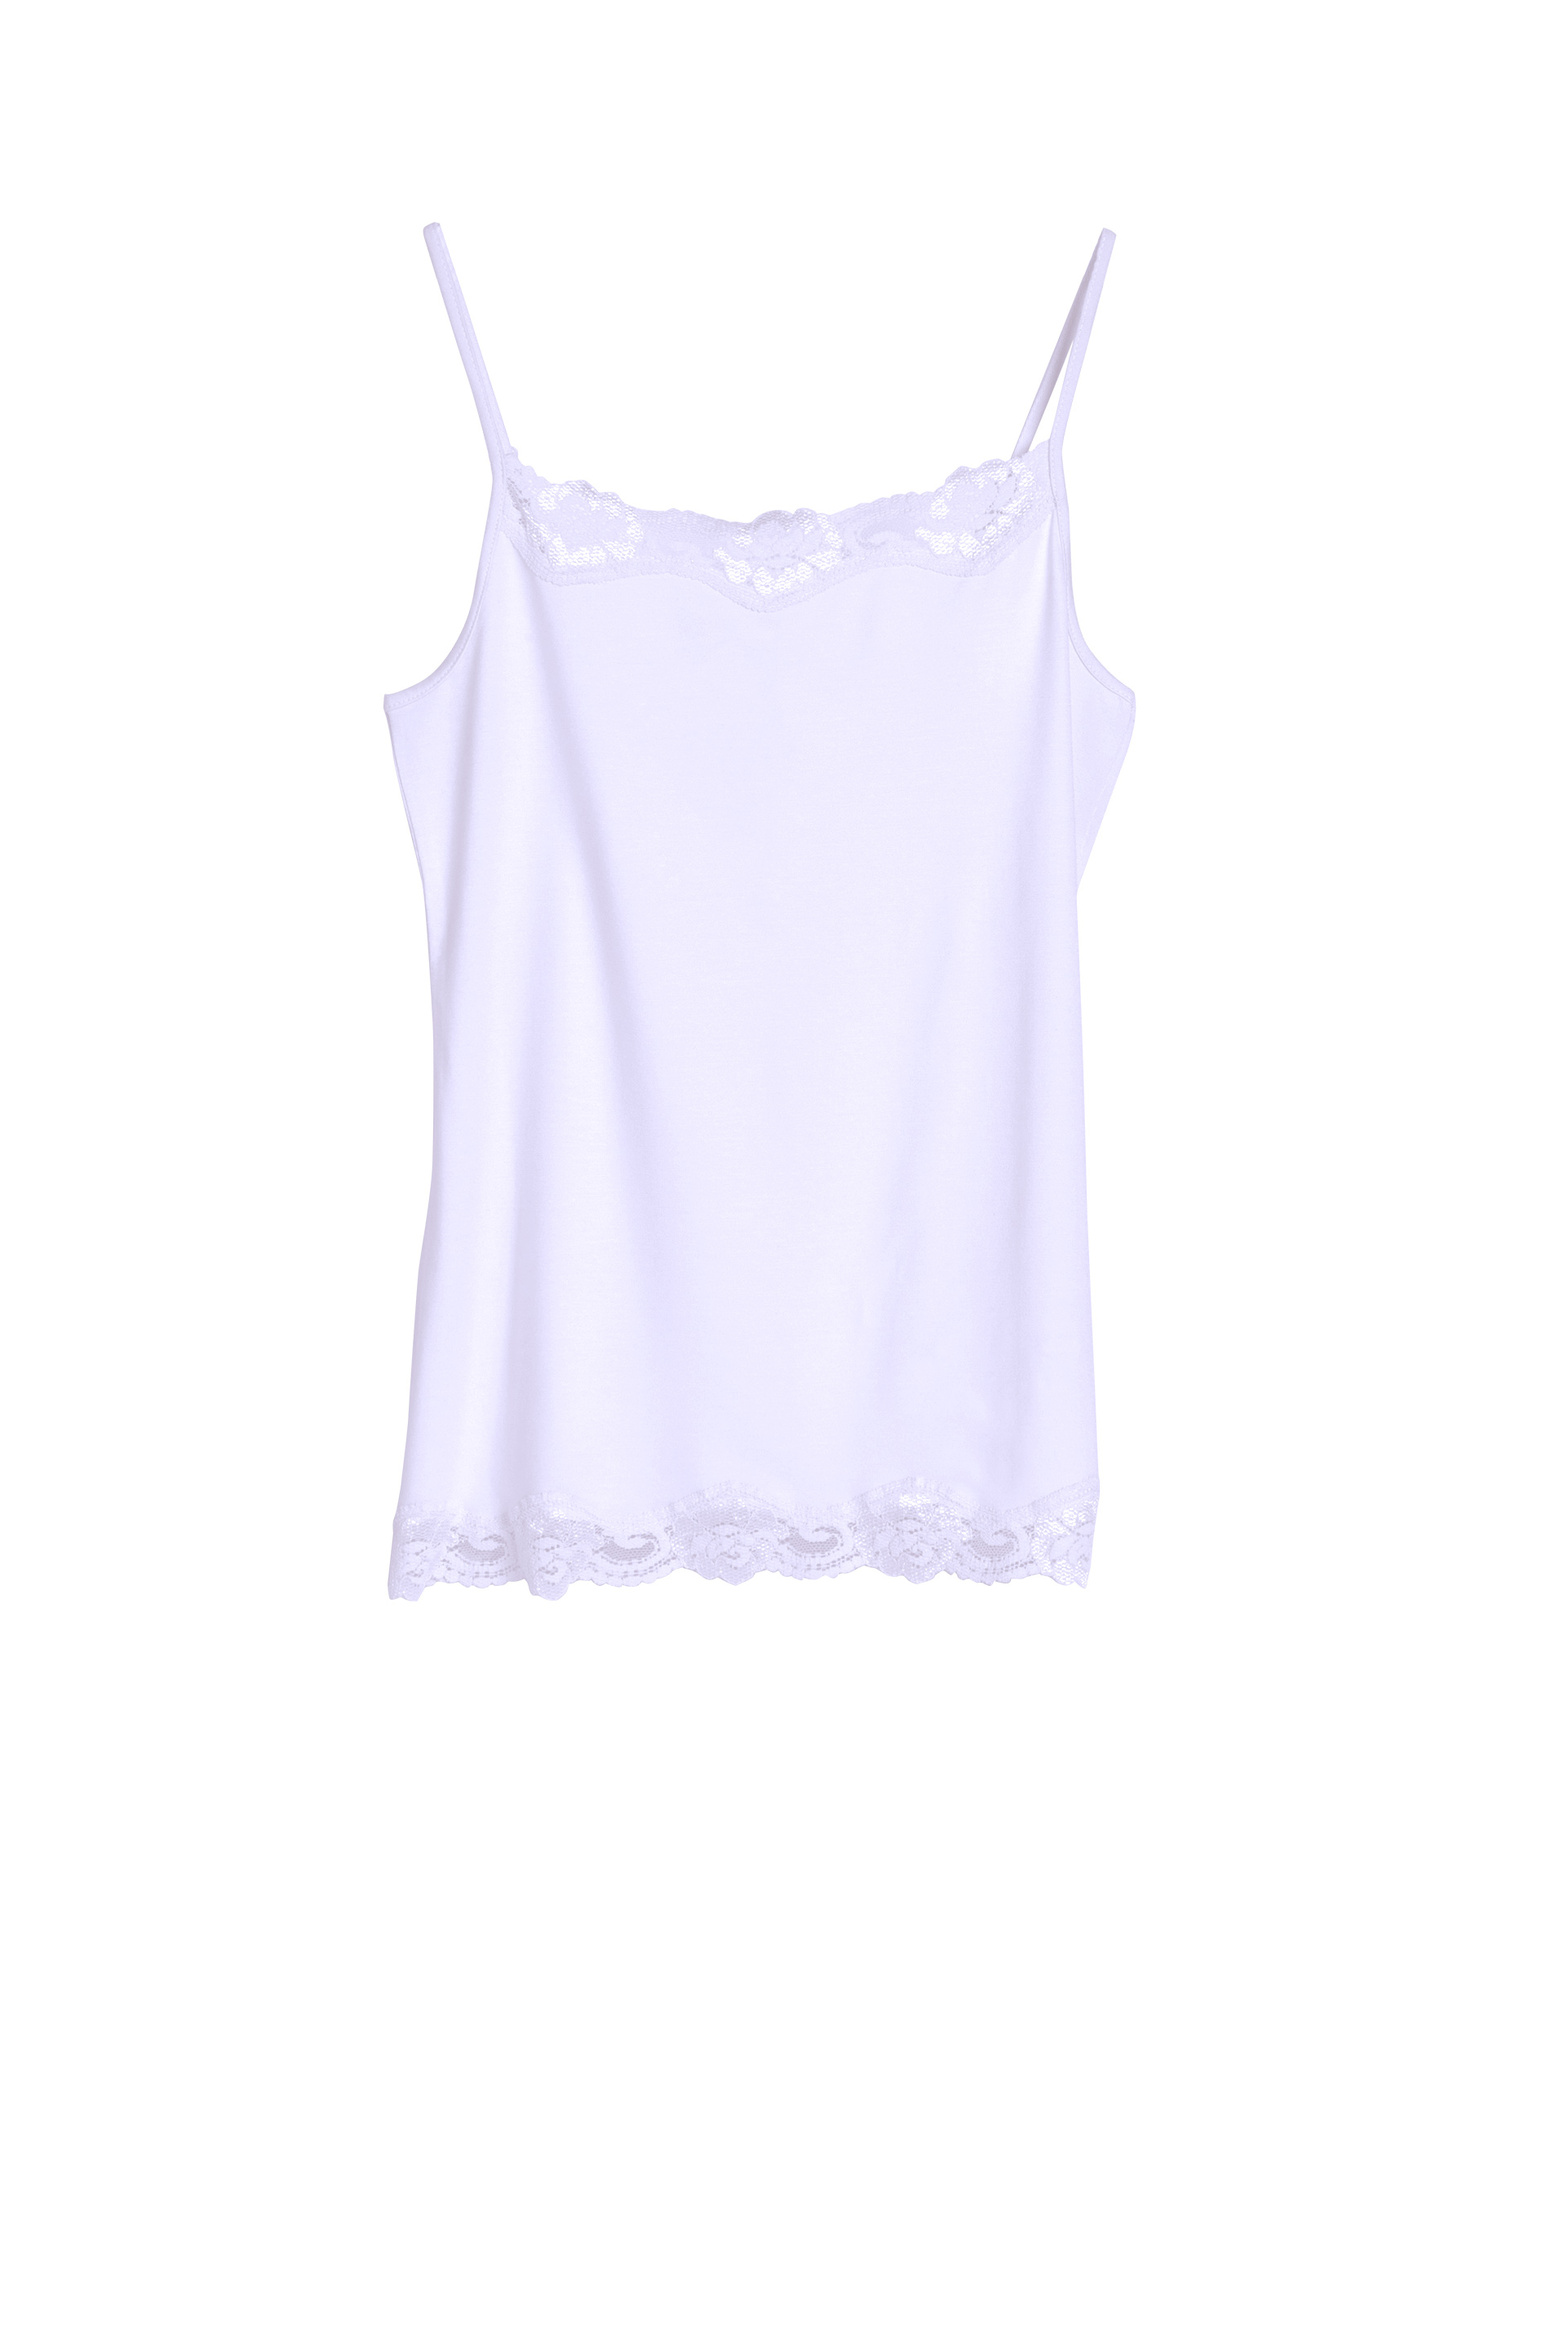 7200_lace_camisole_ice_lavender.jpg